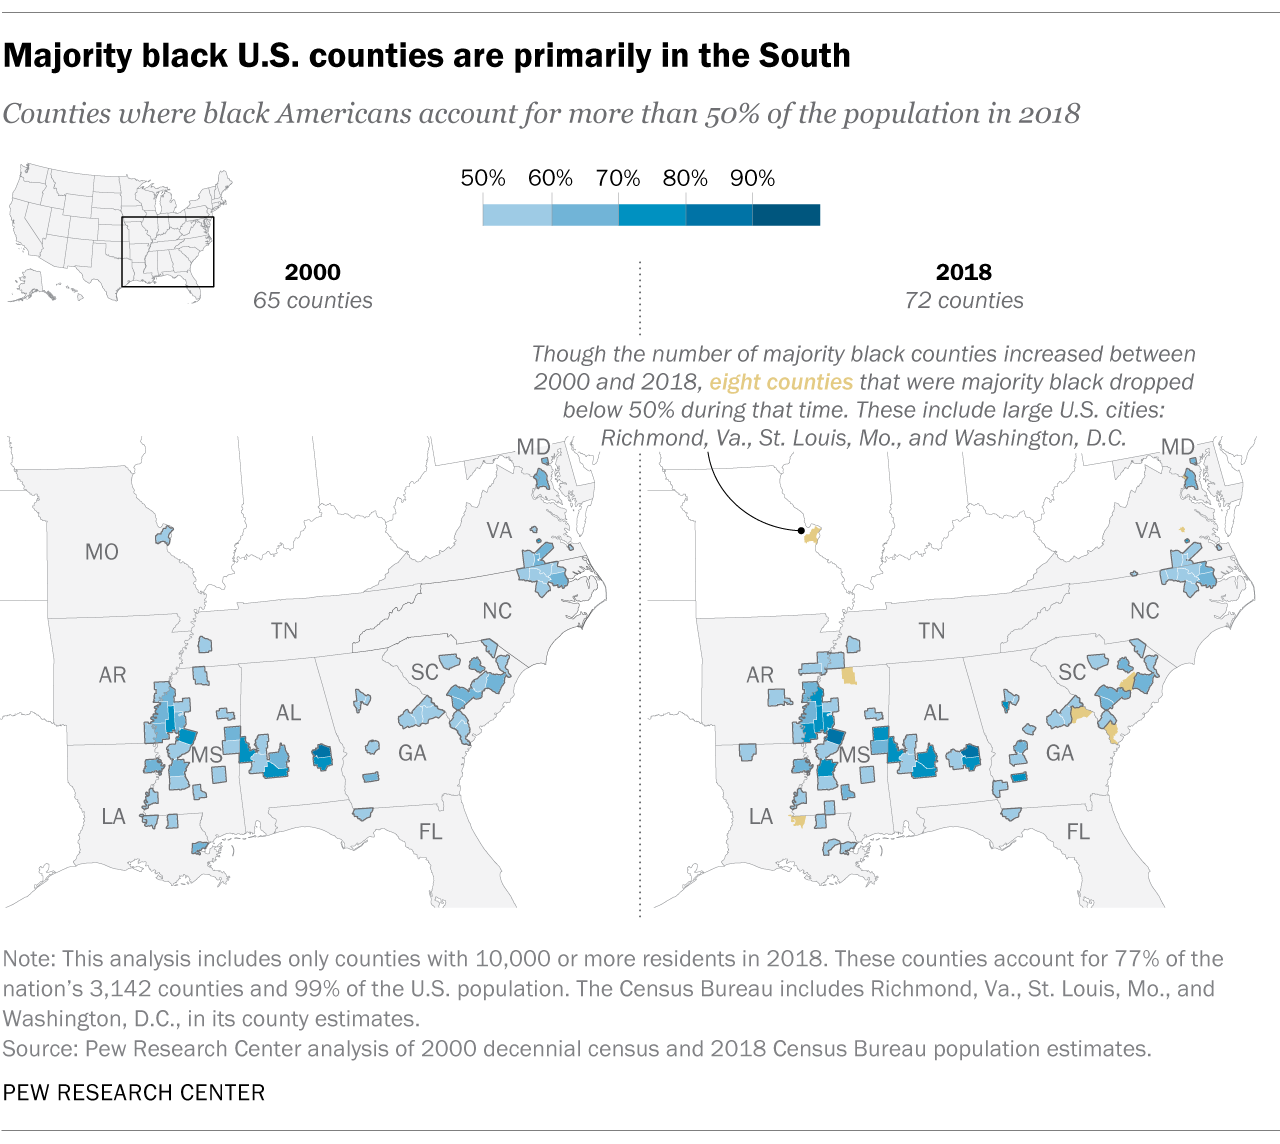 Majority black U.S. counties are primarily in the South